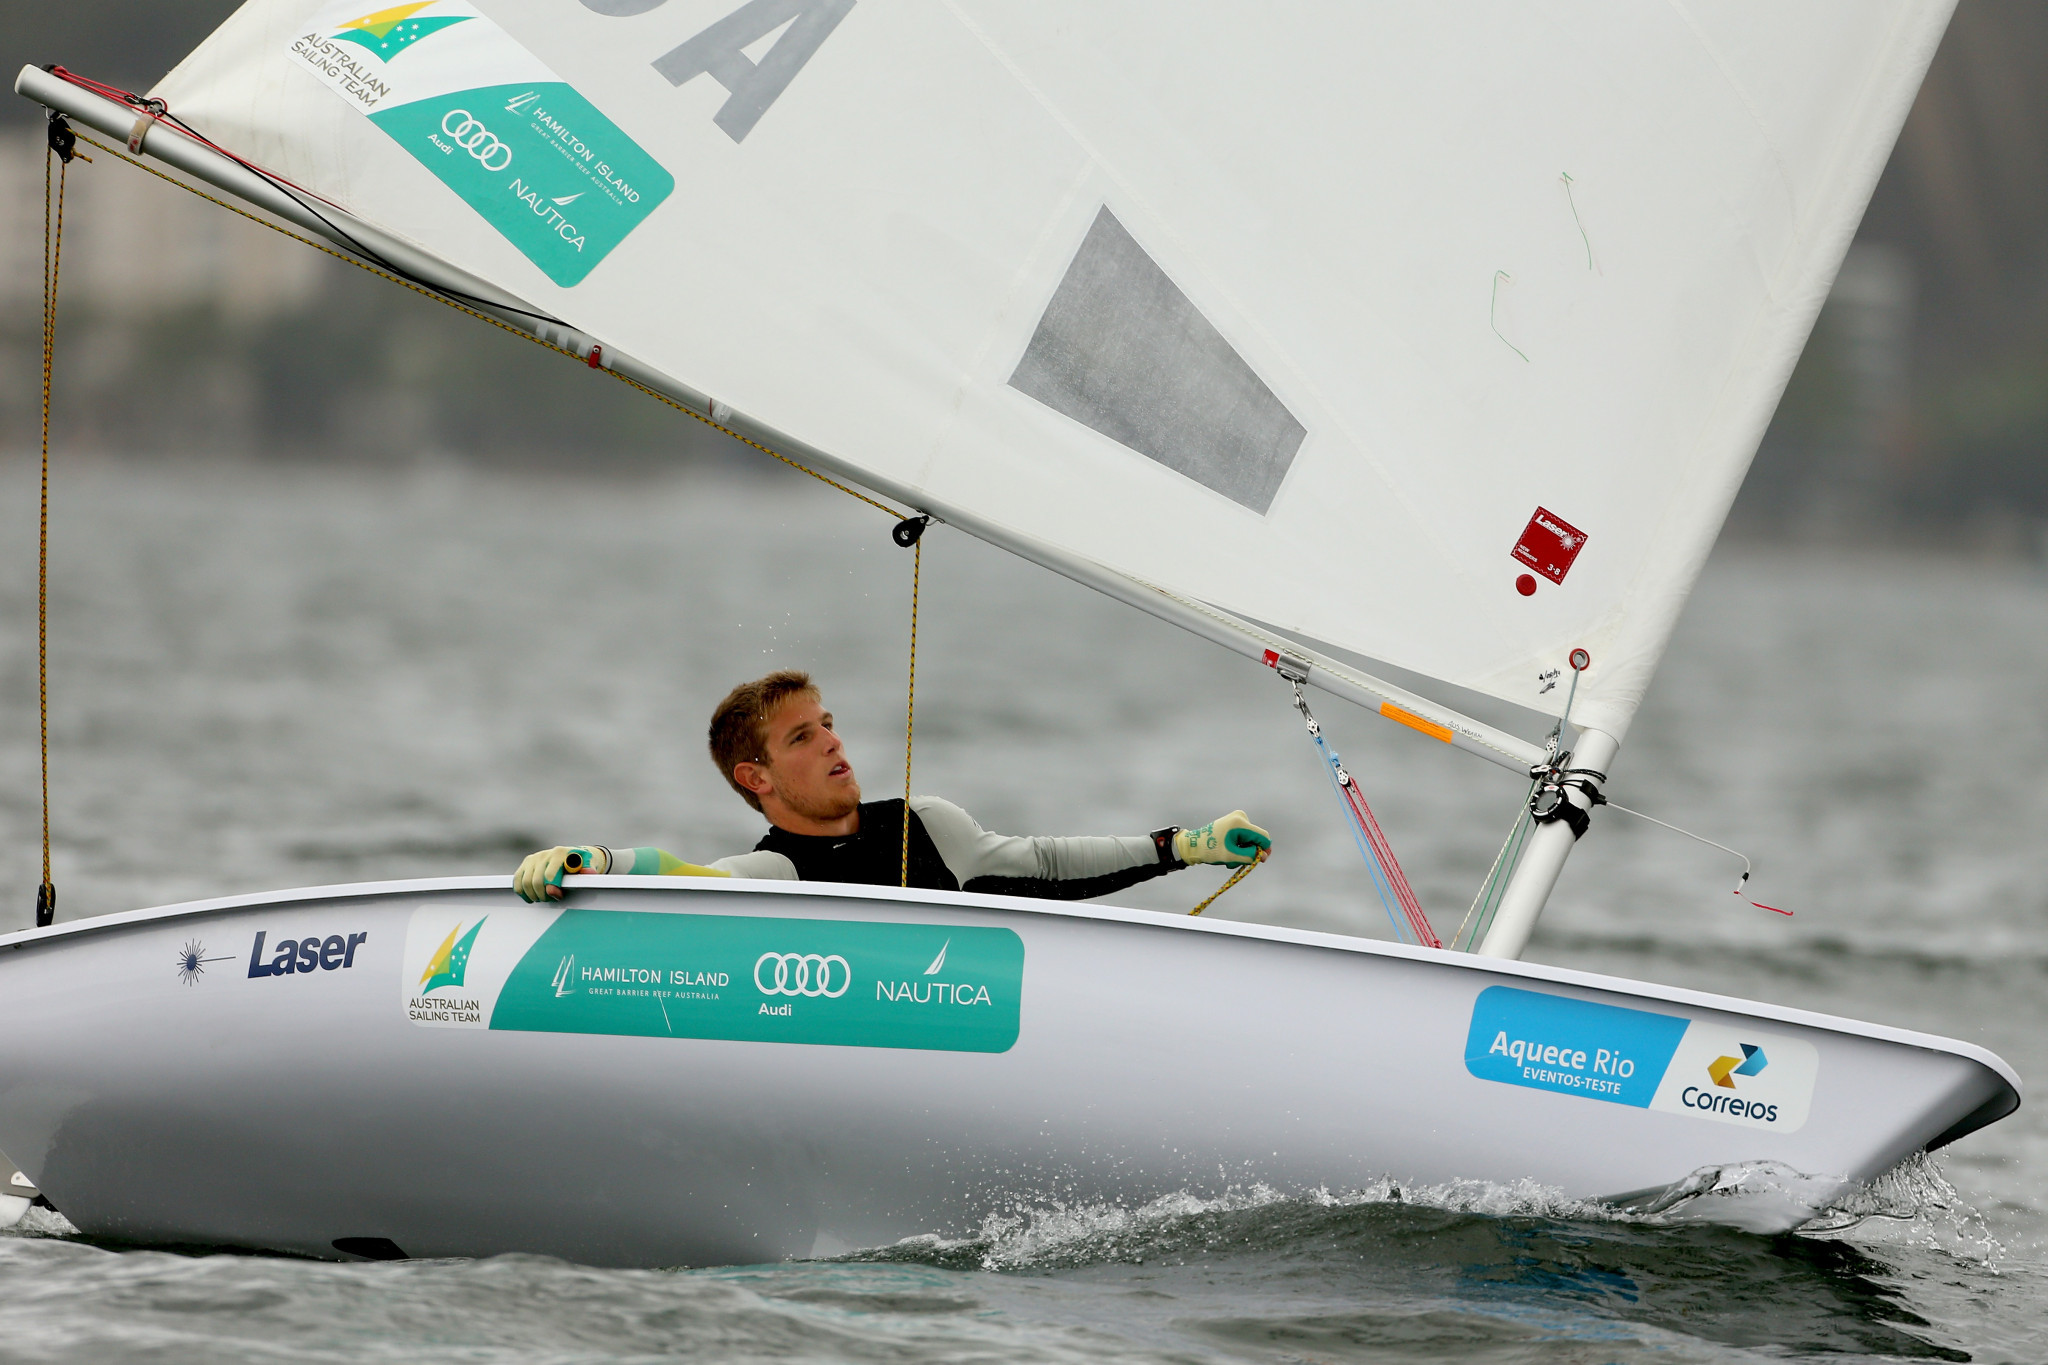 Wearn takes advantage of Meech dip to lead at European Laser Championships